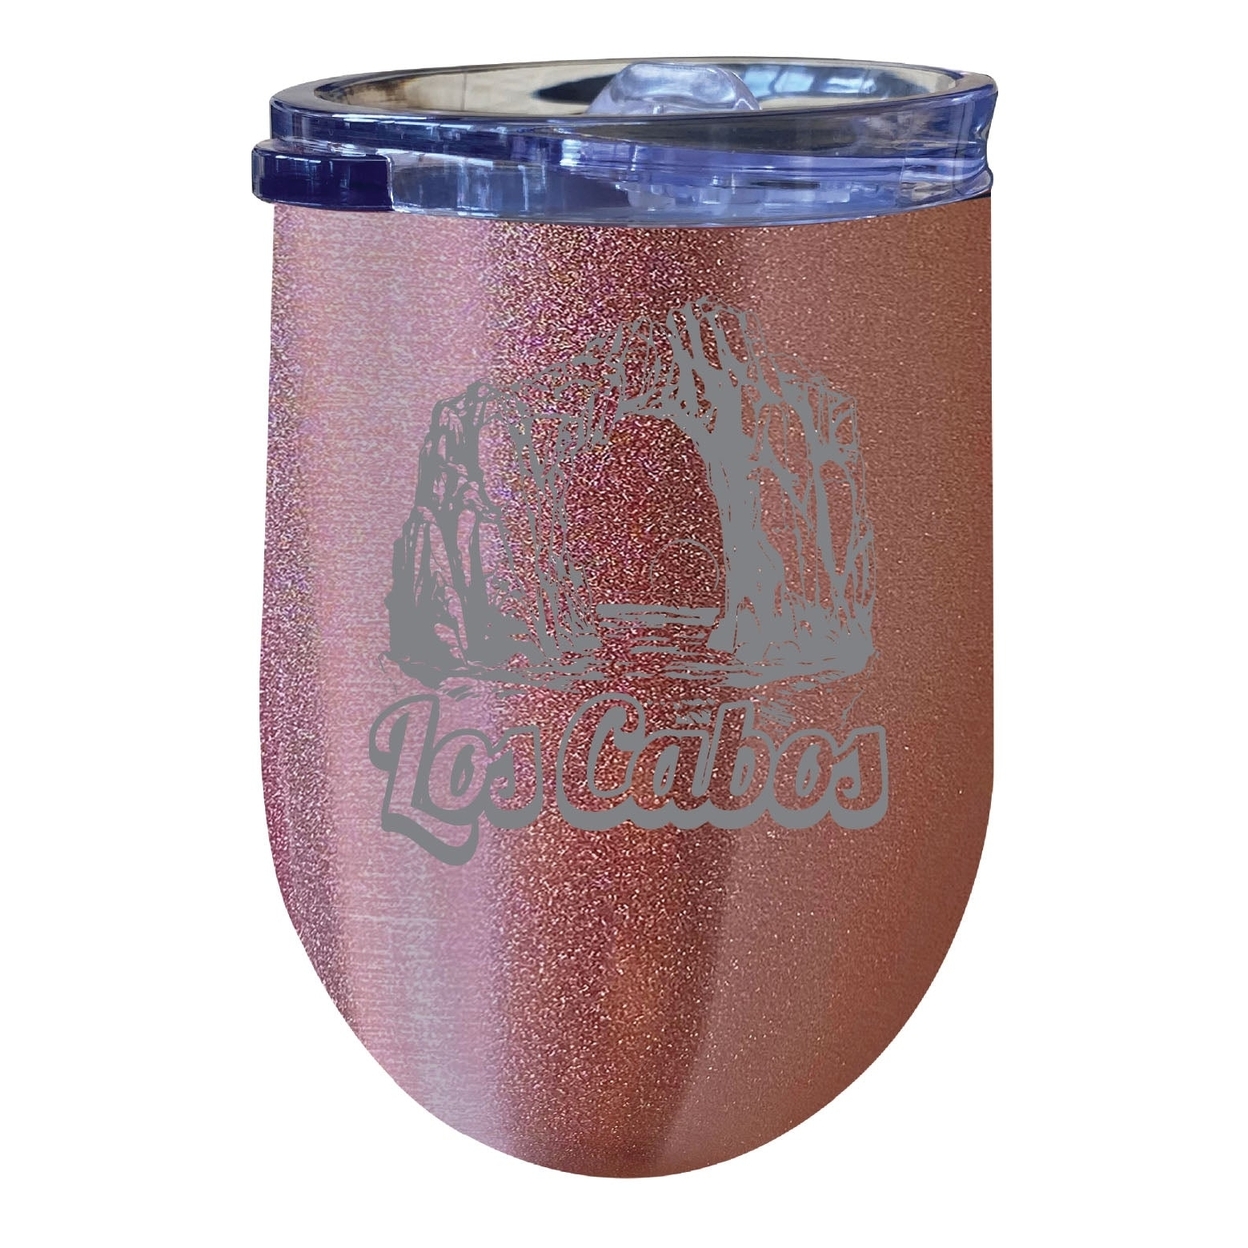 Los Cabos Mexico Souvenir 12 Oz Engraved Insulated Wine Stainless Steel Tumbler - Rose Gold,,Single Unit